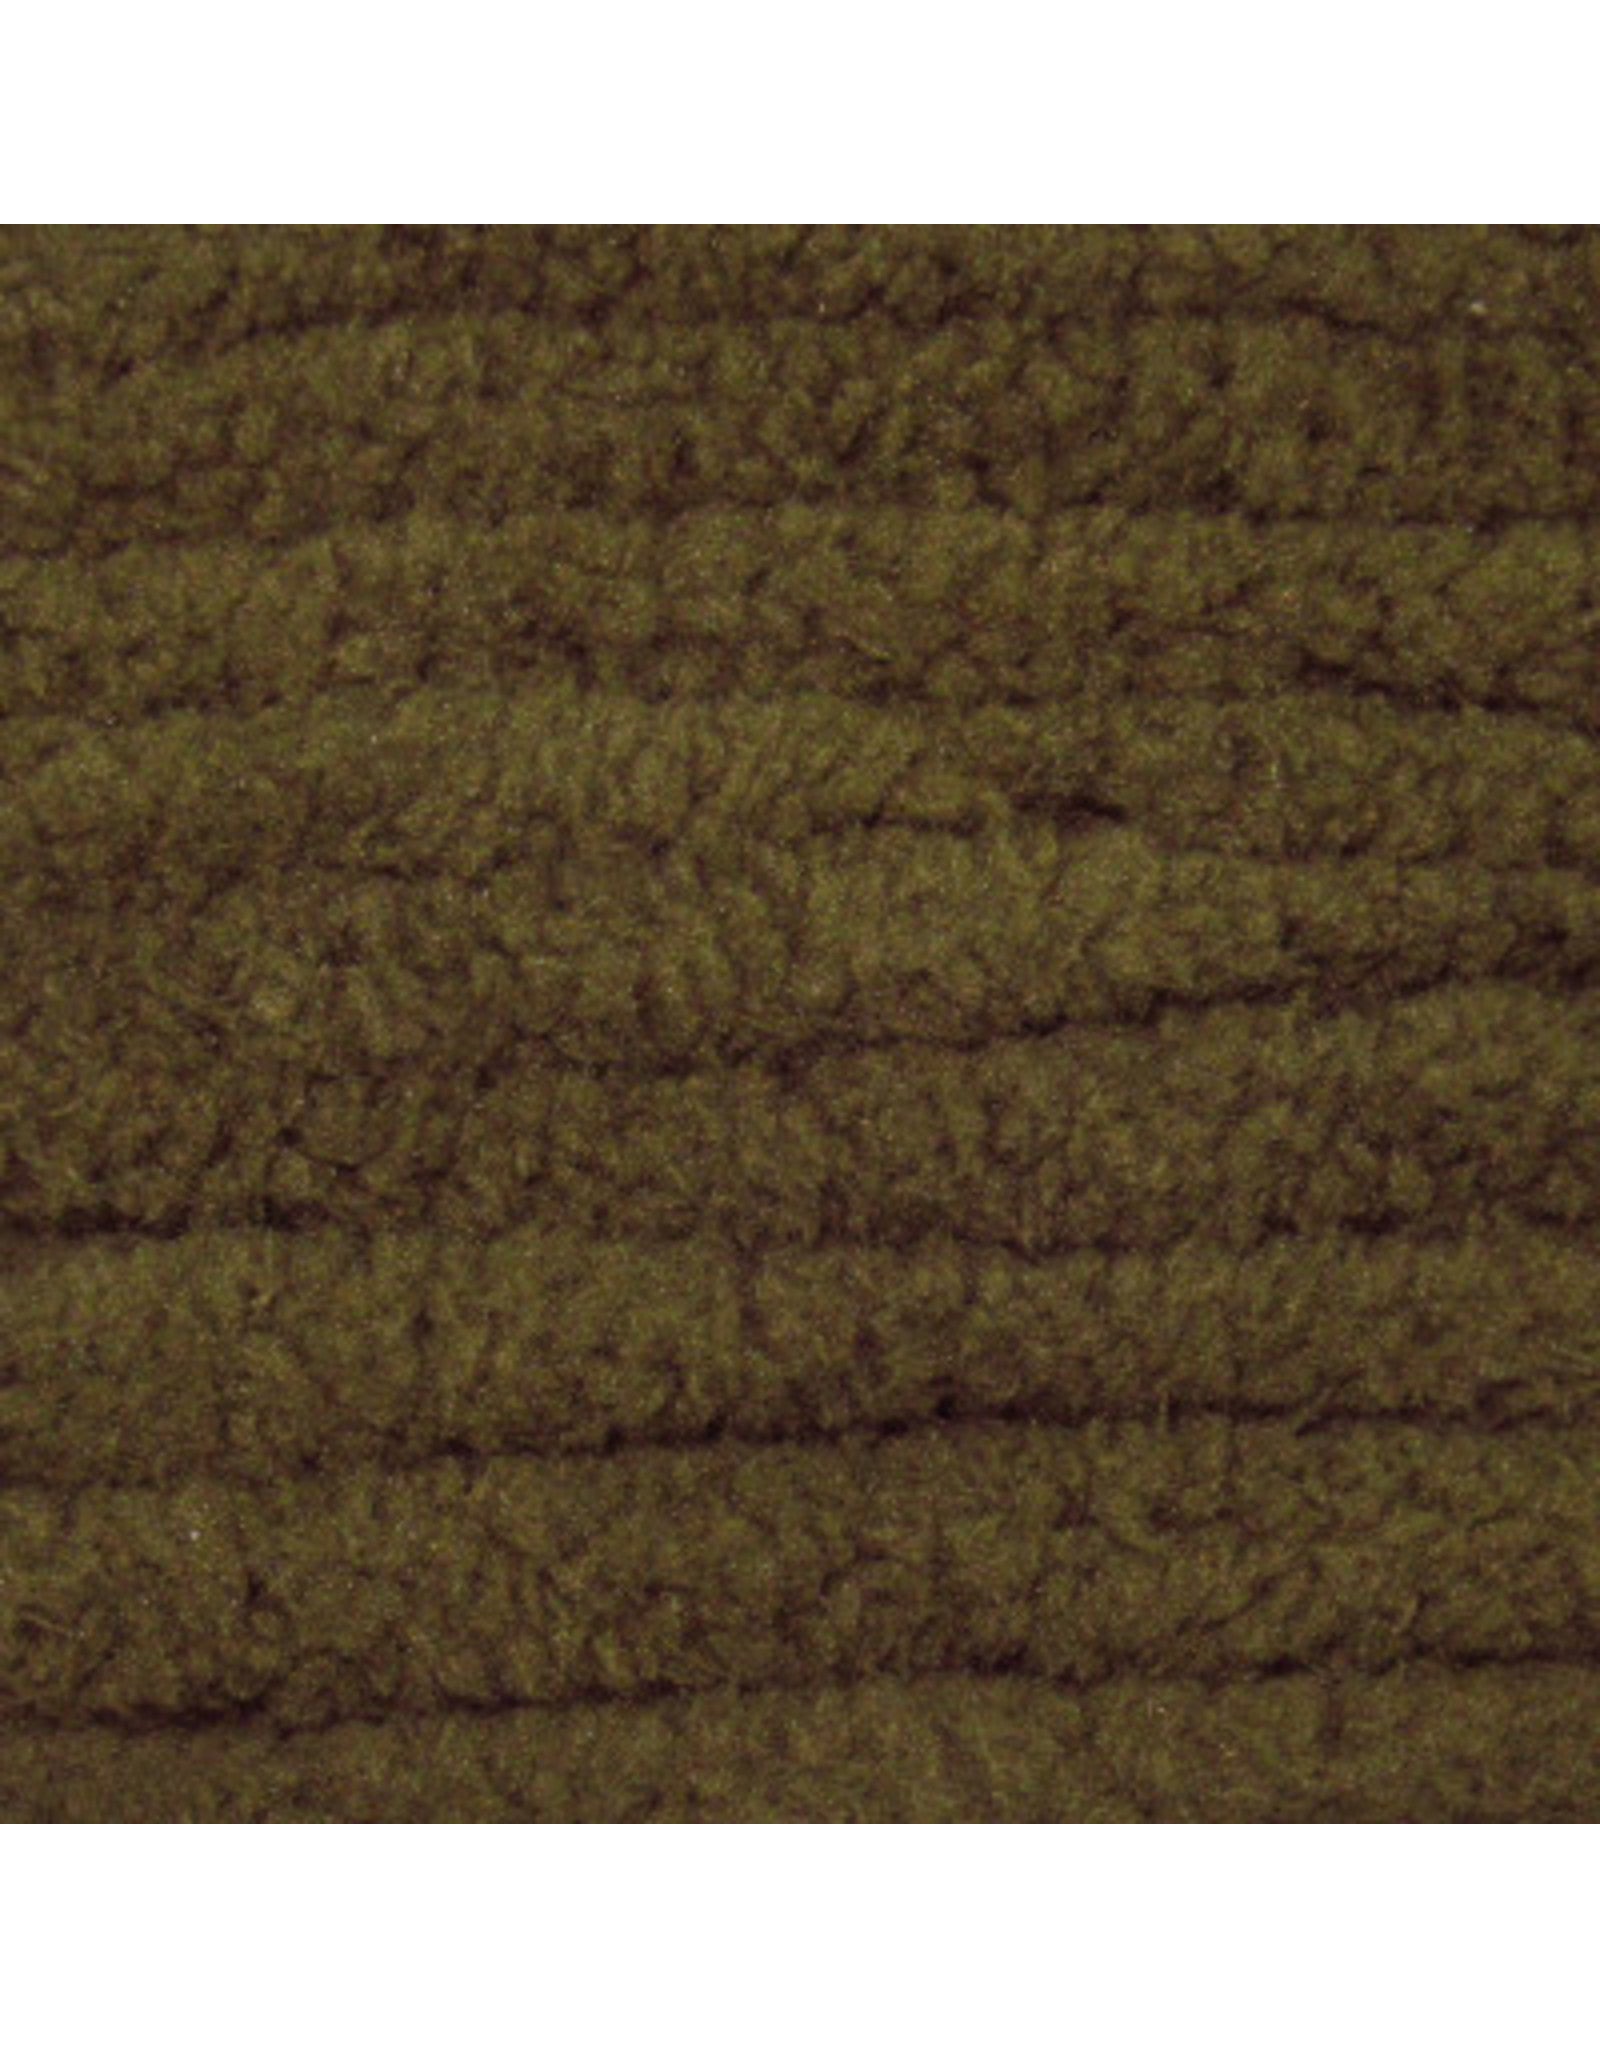 MOP Chenille at The Fly Shop